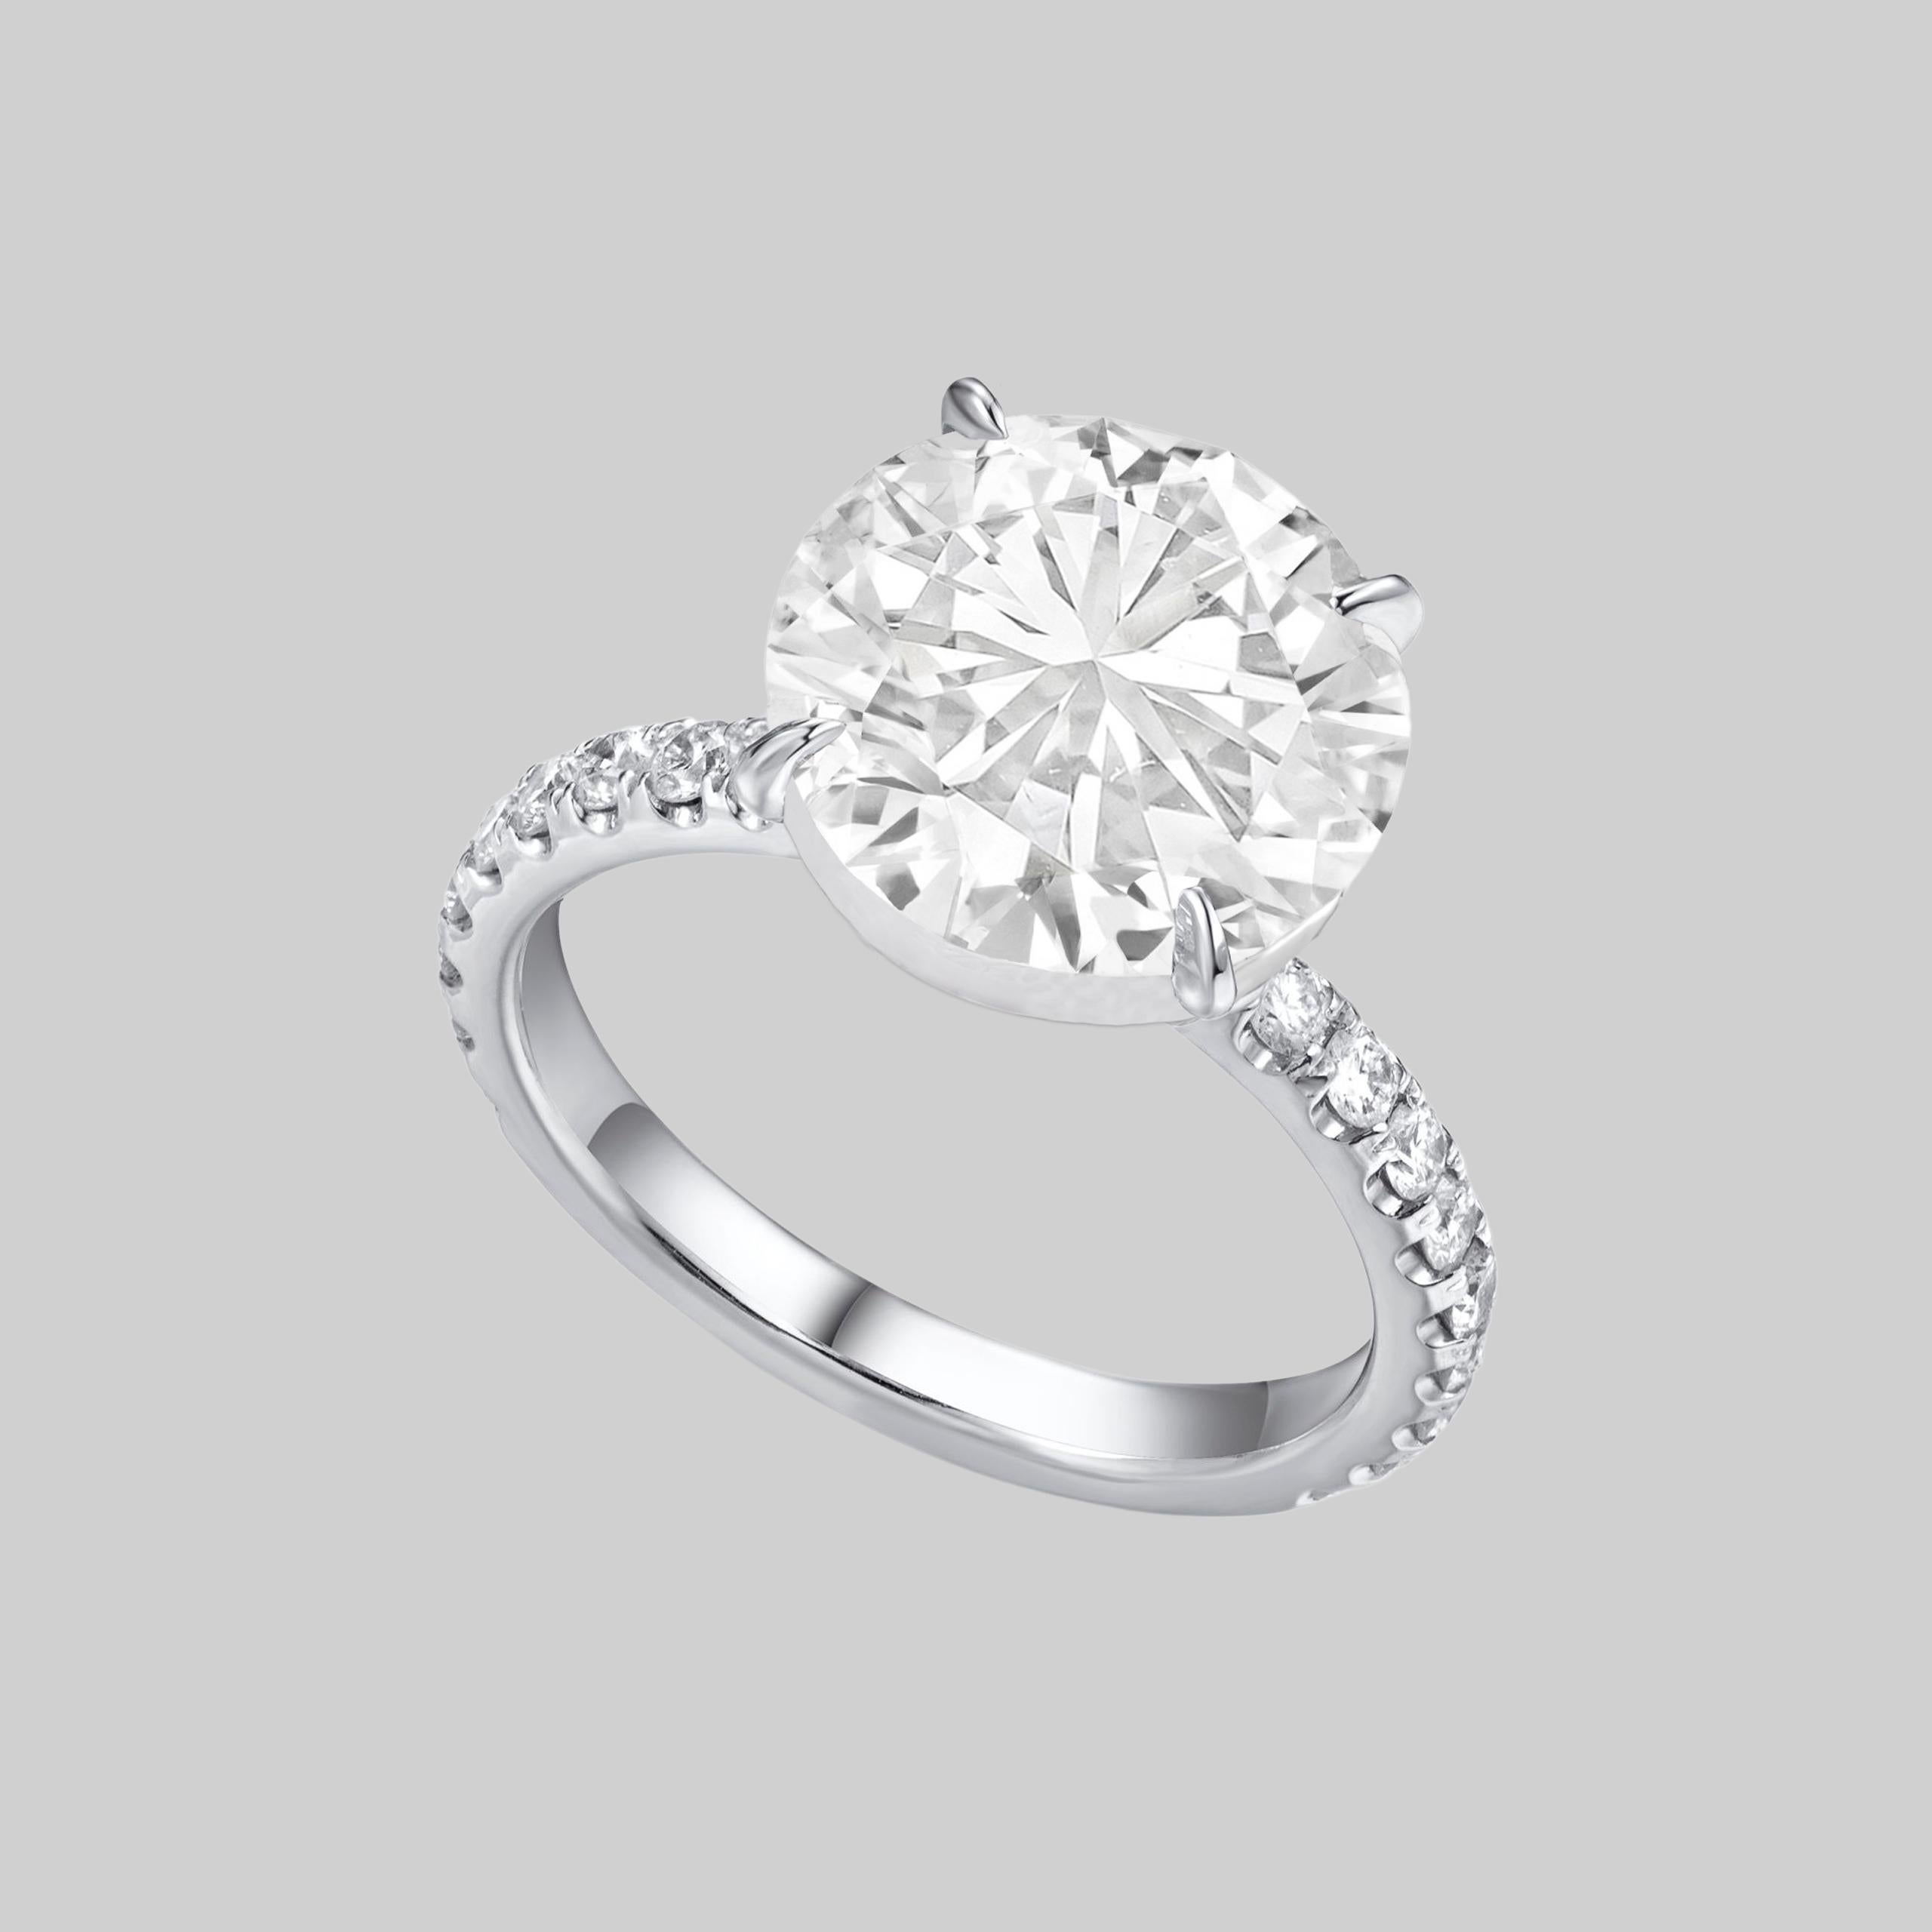 dazzling and substantial 3.70 carat round brilliant cut diamond is bright white, completely eye clean, and impeccably finished! Cut with absolutely ideal proportions, it displays truly phenomenal sparkle! The diamond is certified by GIA, the world’s